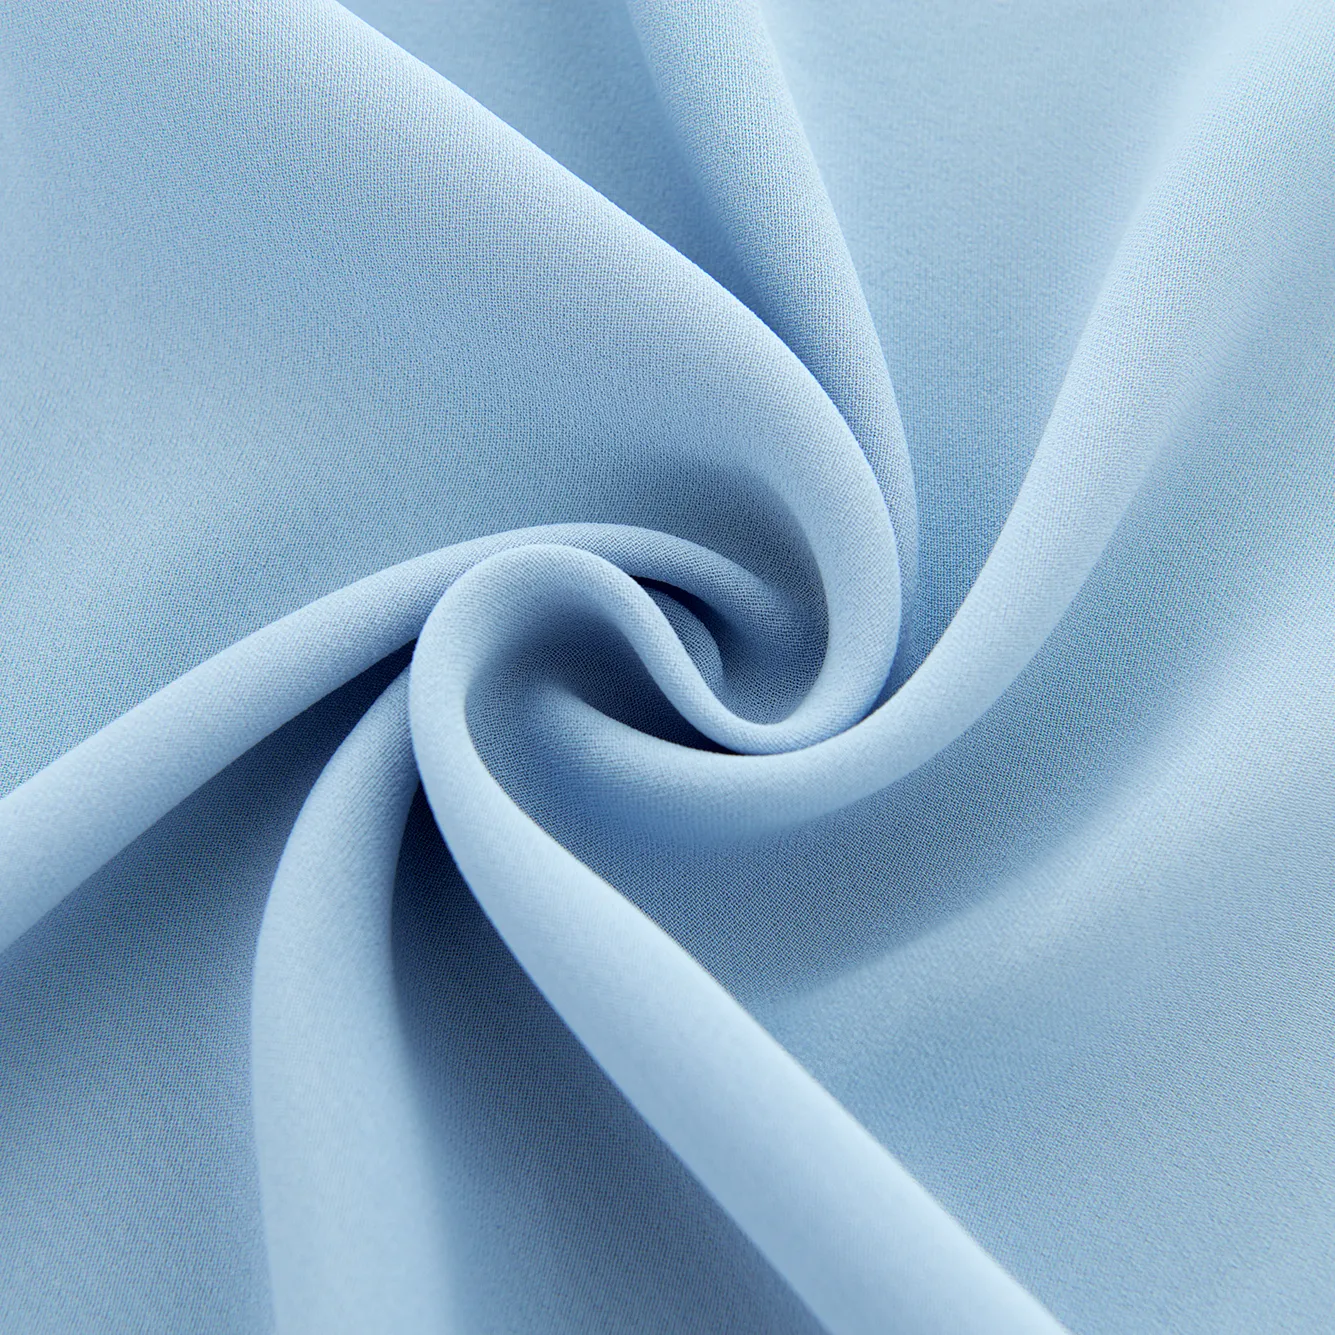 Chinese wholesale Textile company High quality 100% viscose fabric for clothing women dress